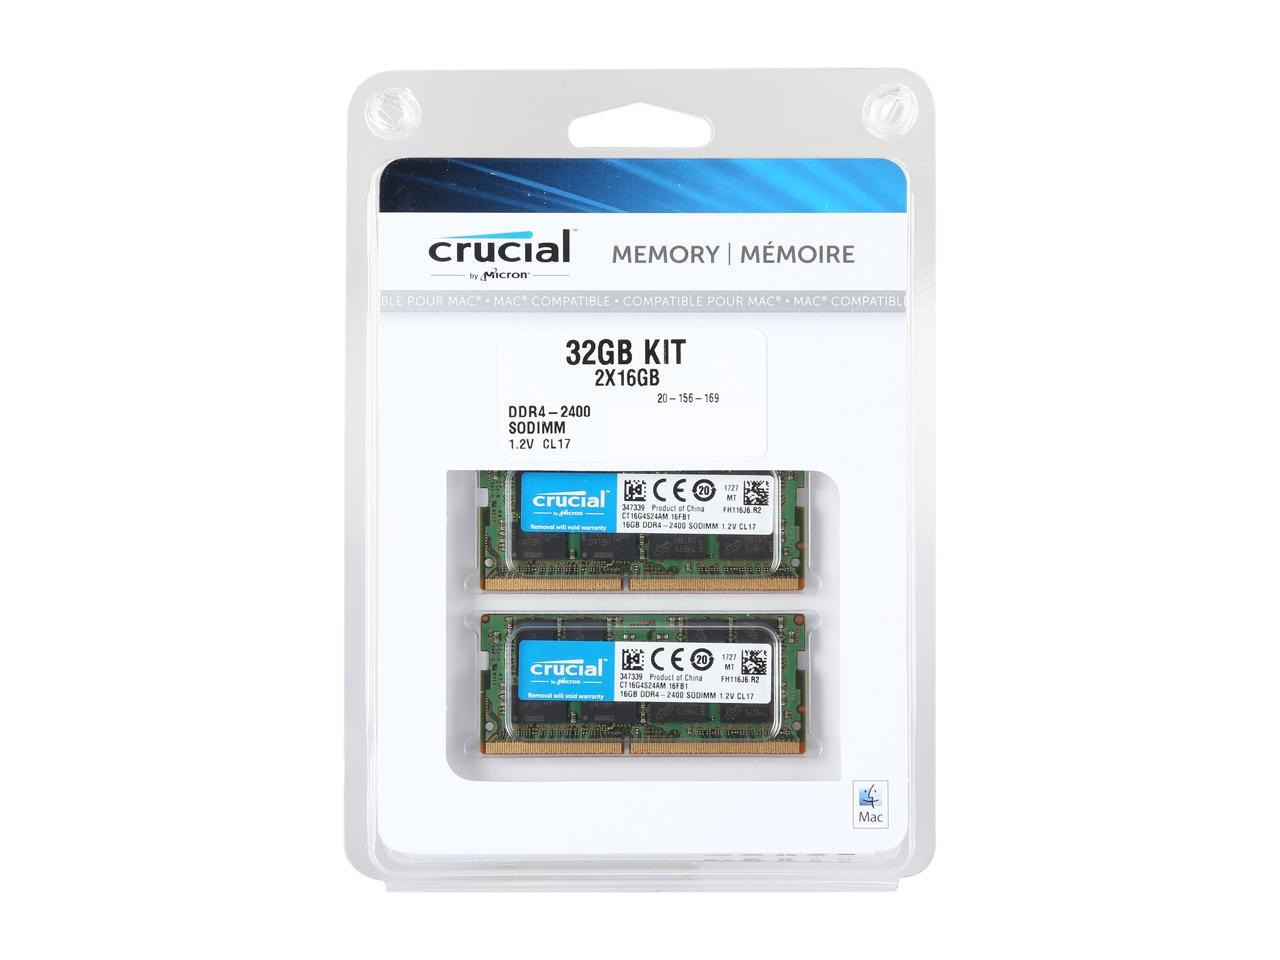 Crucial 32GB Kit (16GBx2) DDR4 2400 MT/s (PC4-19200) DR x8 SODIMM 260-Pin for Mac - CT2K16G4S24AM - image 2 of 2